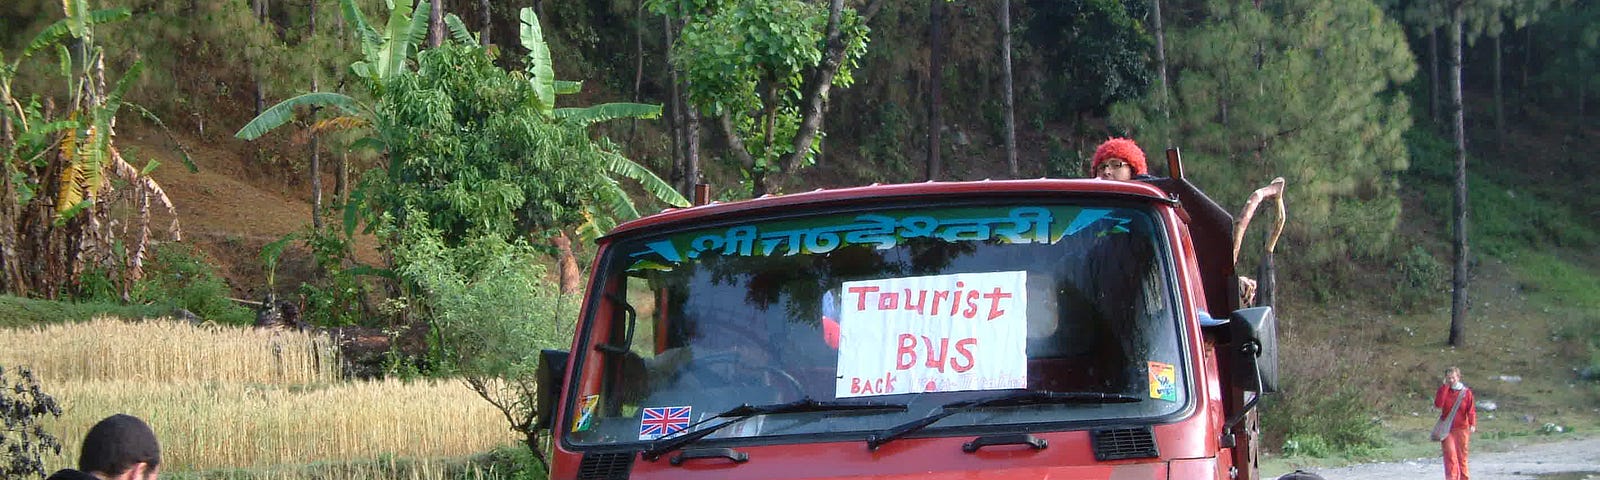 Eight men are pushing the front of a red pickup truck with a sign in the windshield that says “Tourist Bus.” There are trees along the side of the road.